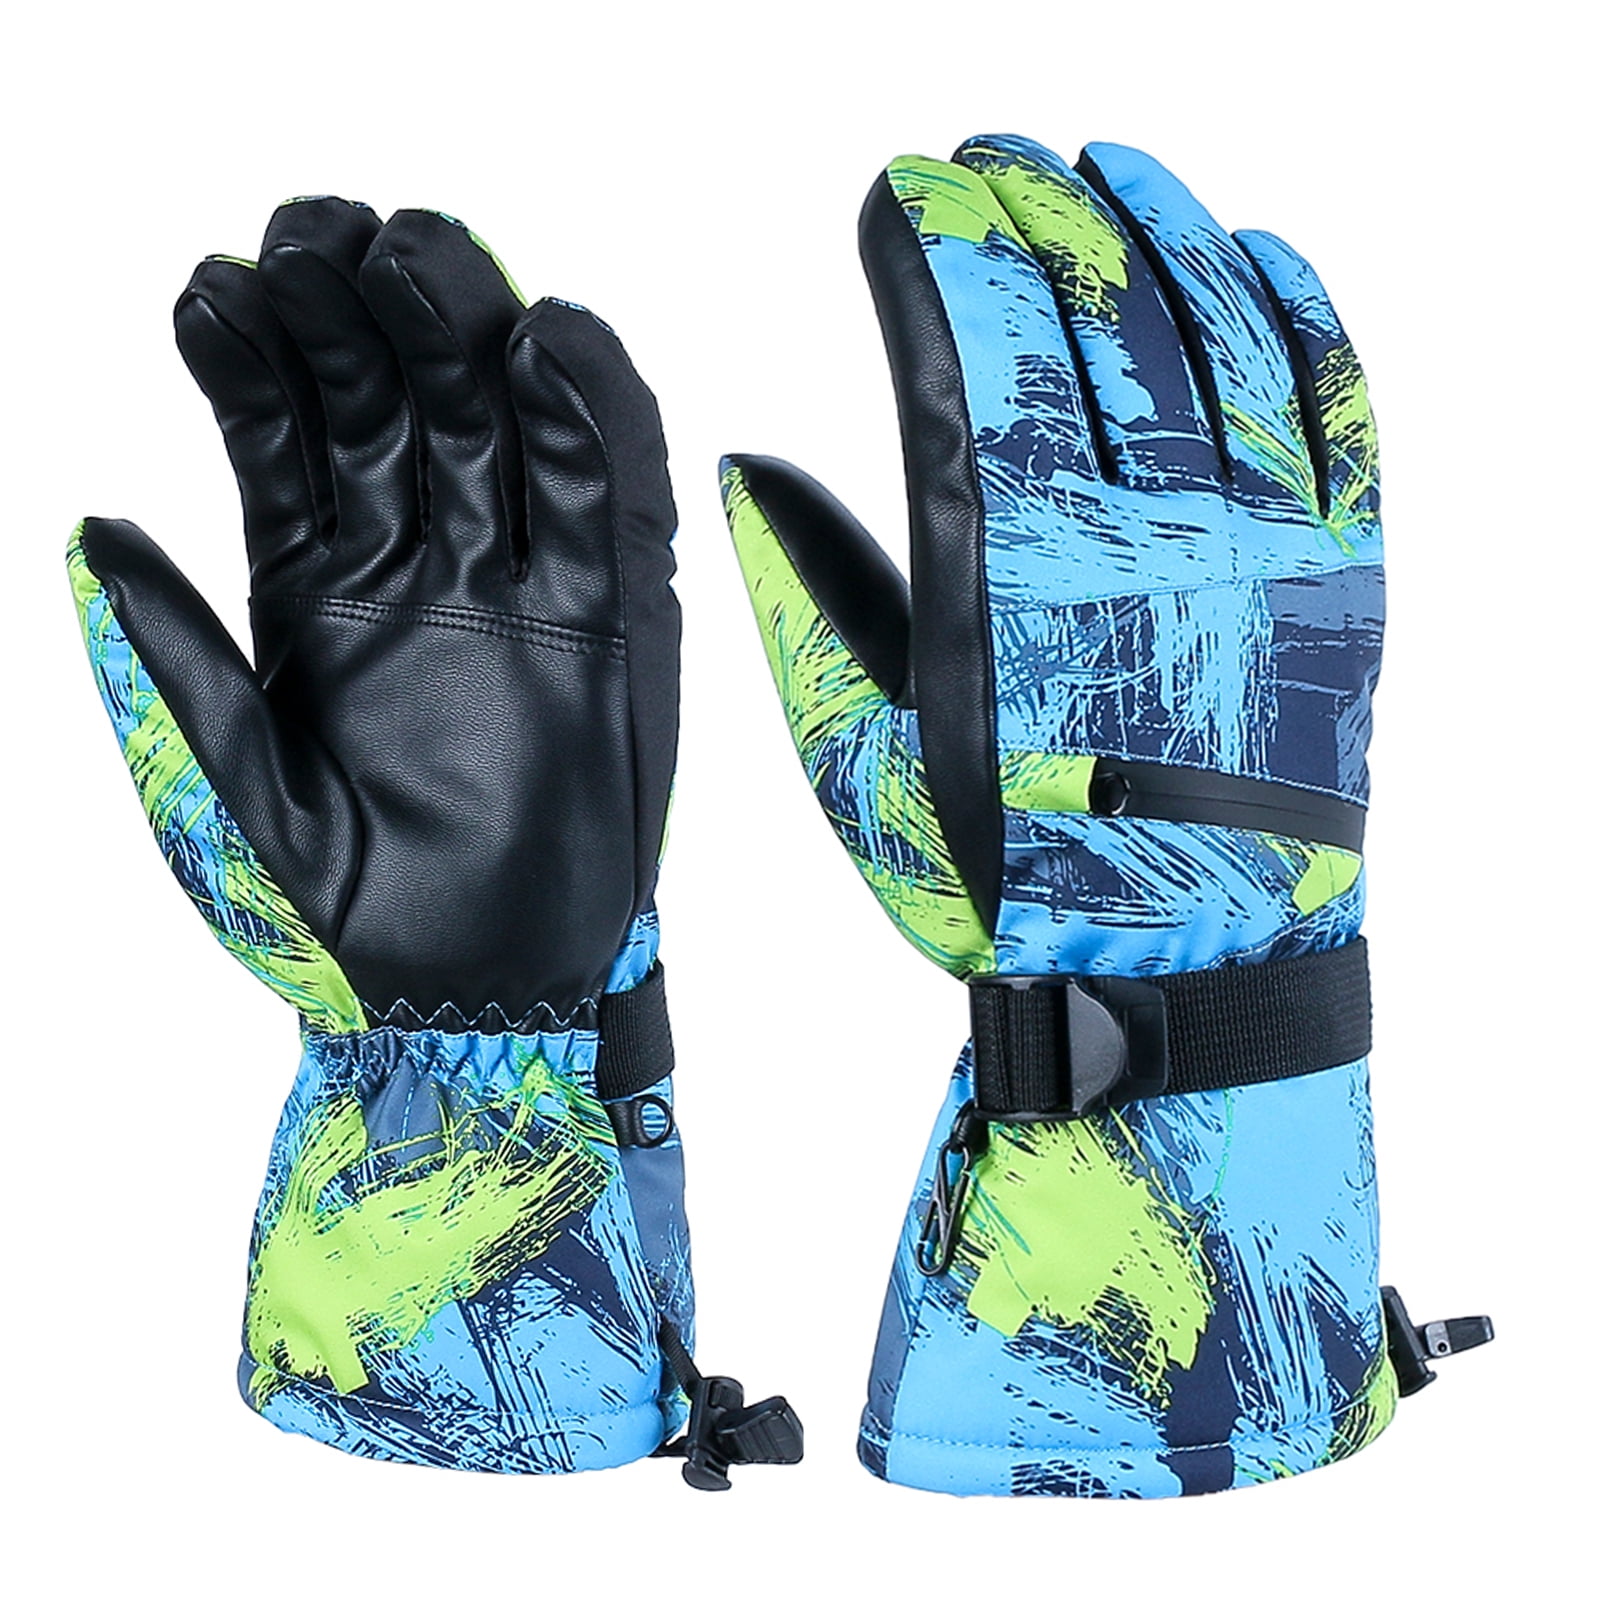 Details about   Windproof Waterproof Warm Winter Ski Gloves Touch Screen Snow Thermal Mittens US 